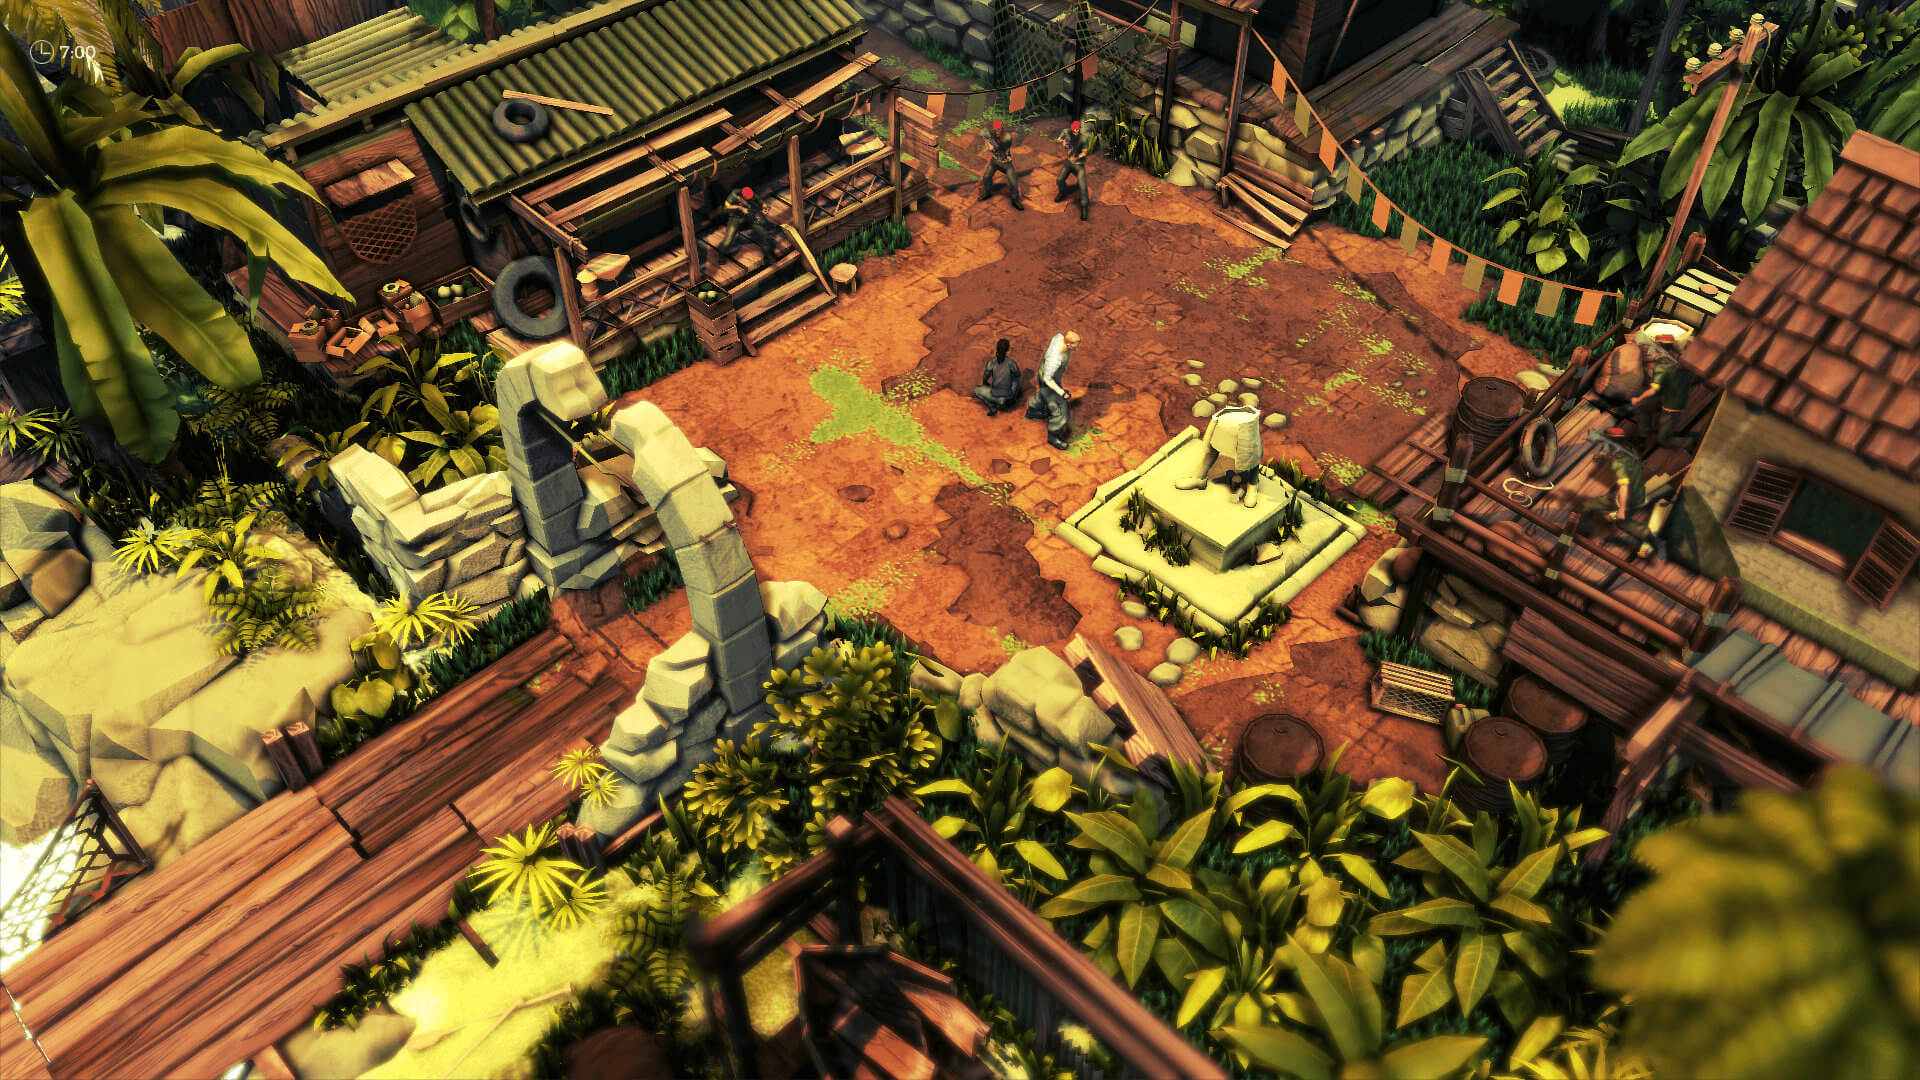 Jagged Alliance 3 New Wallpapers